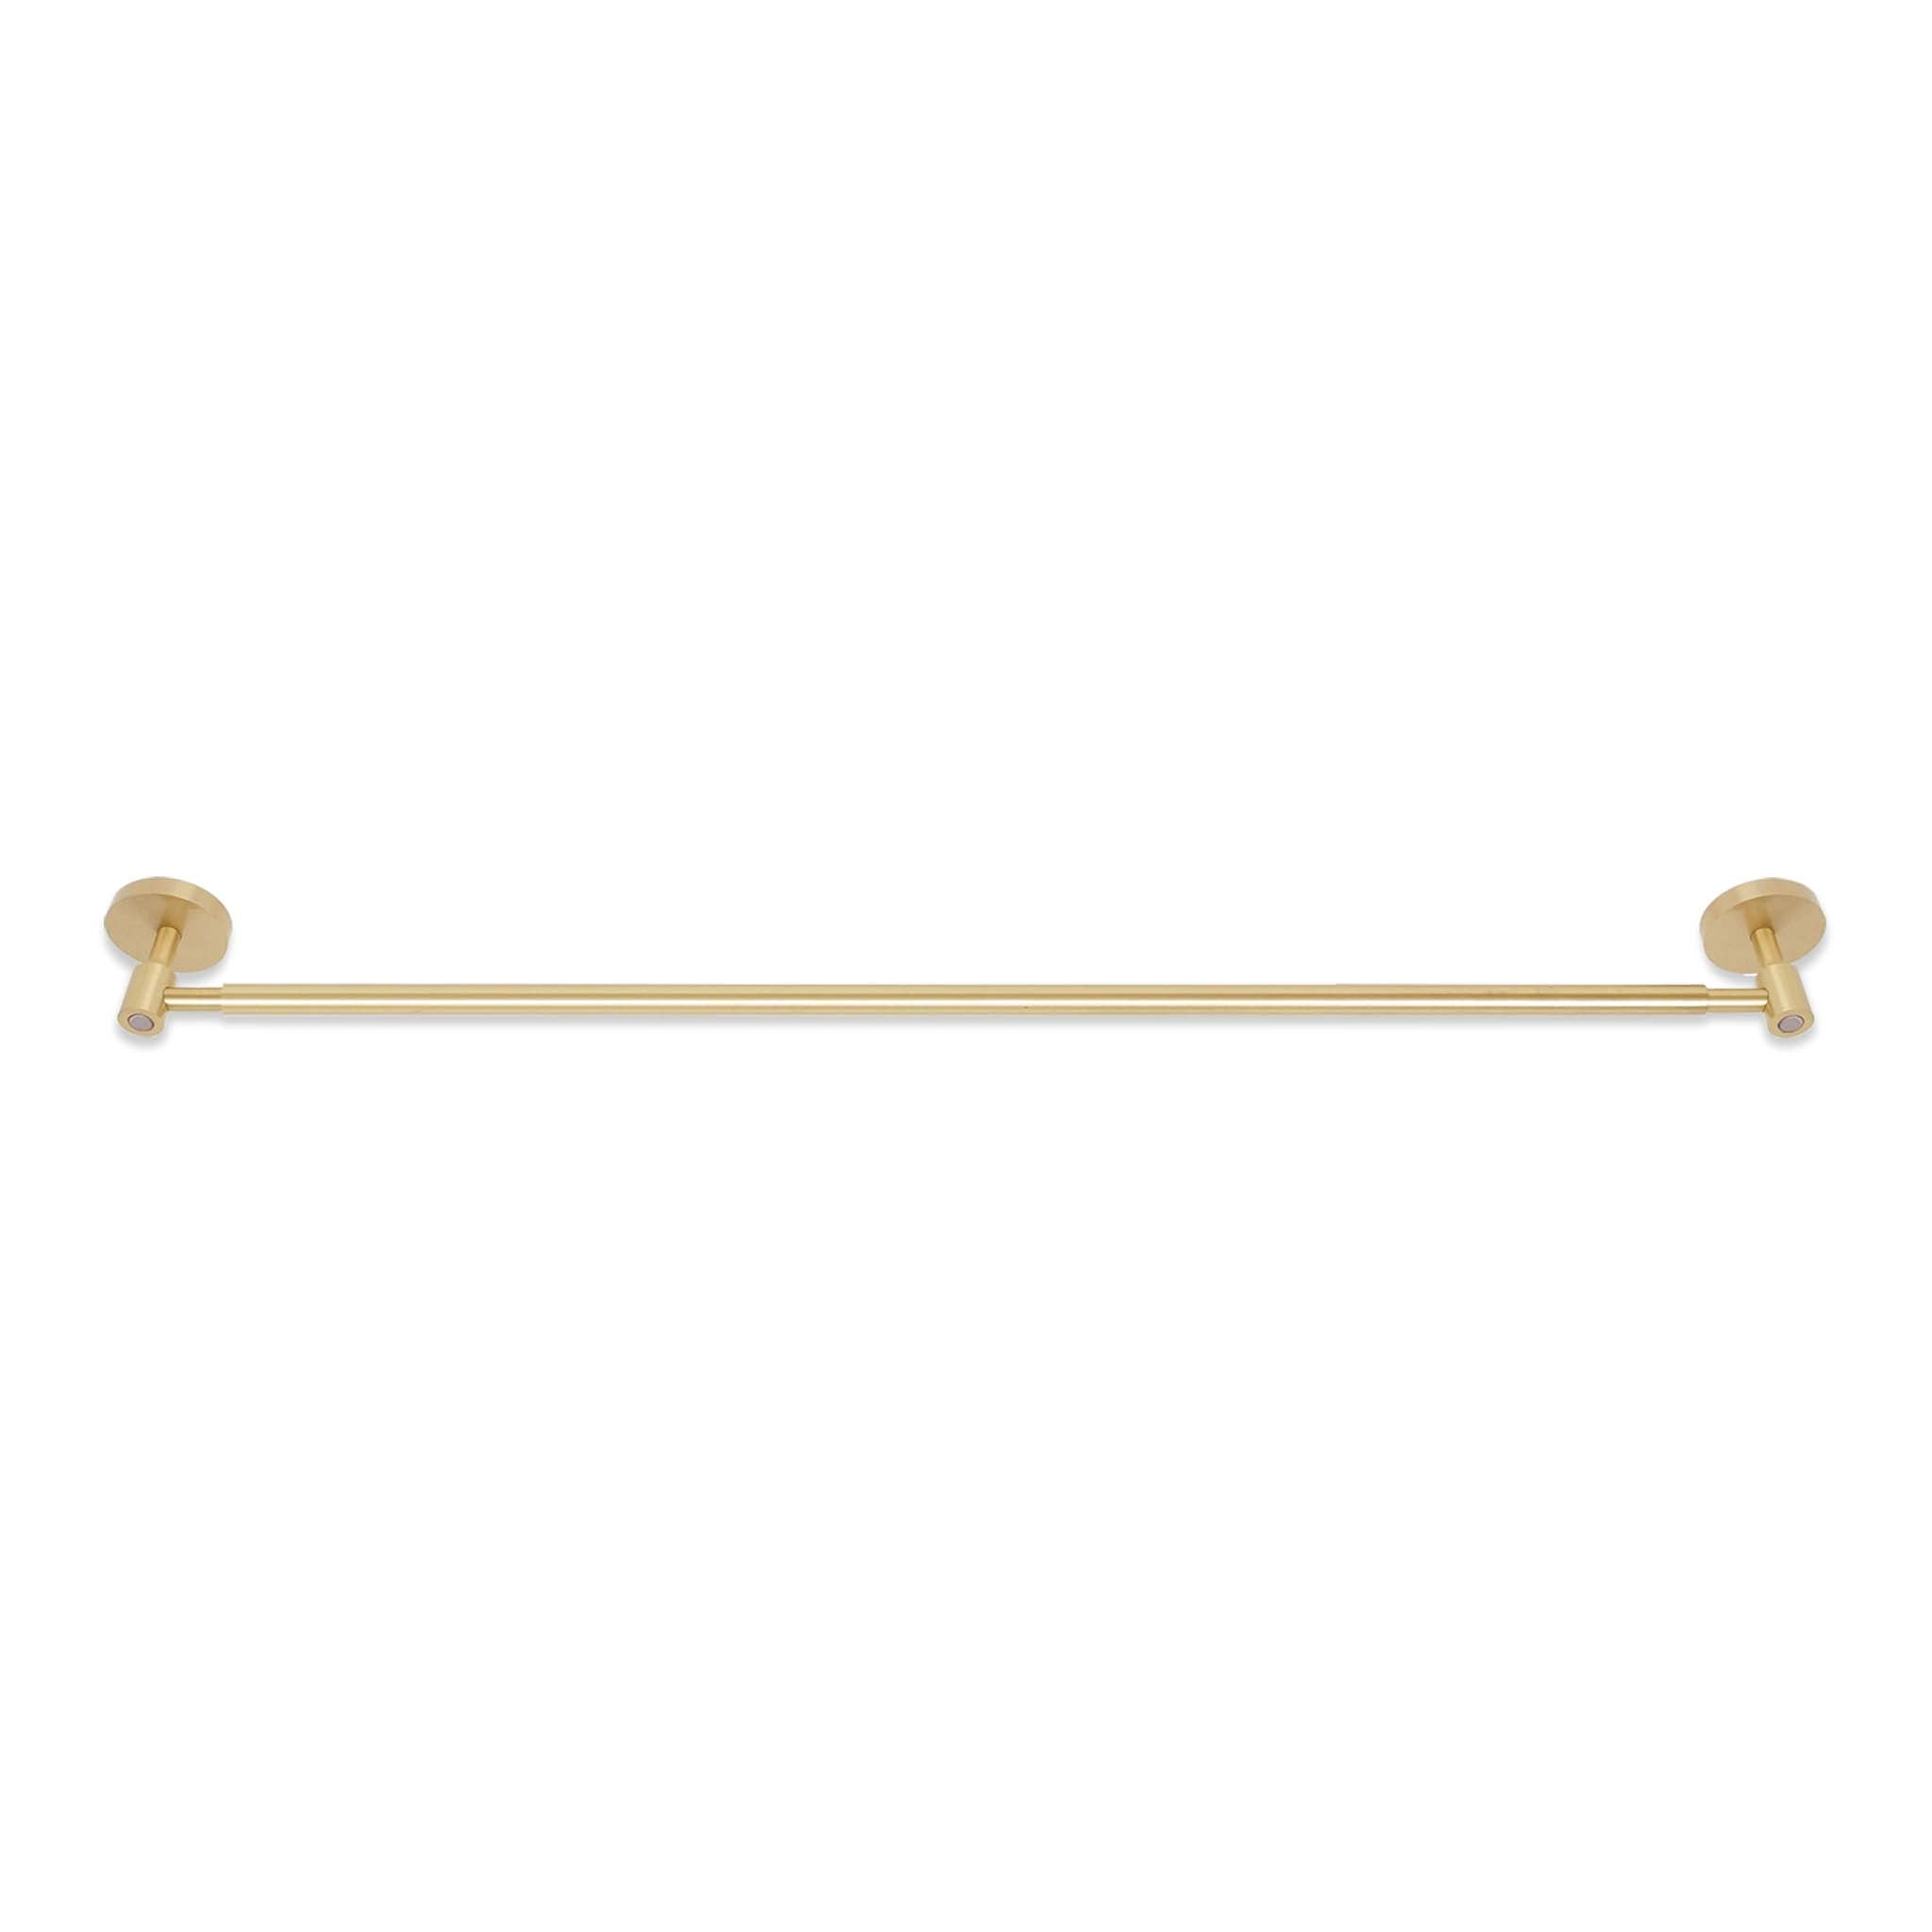 Brass and barely color Head towel bar 24" Dutton Brown hardware